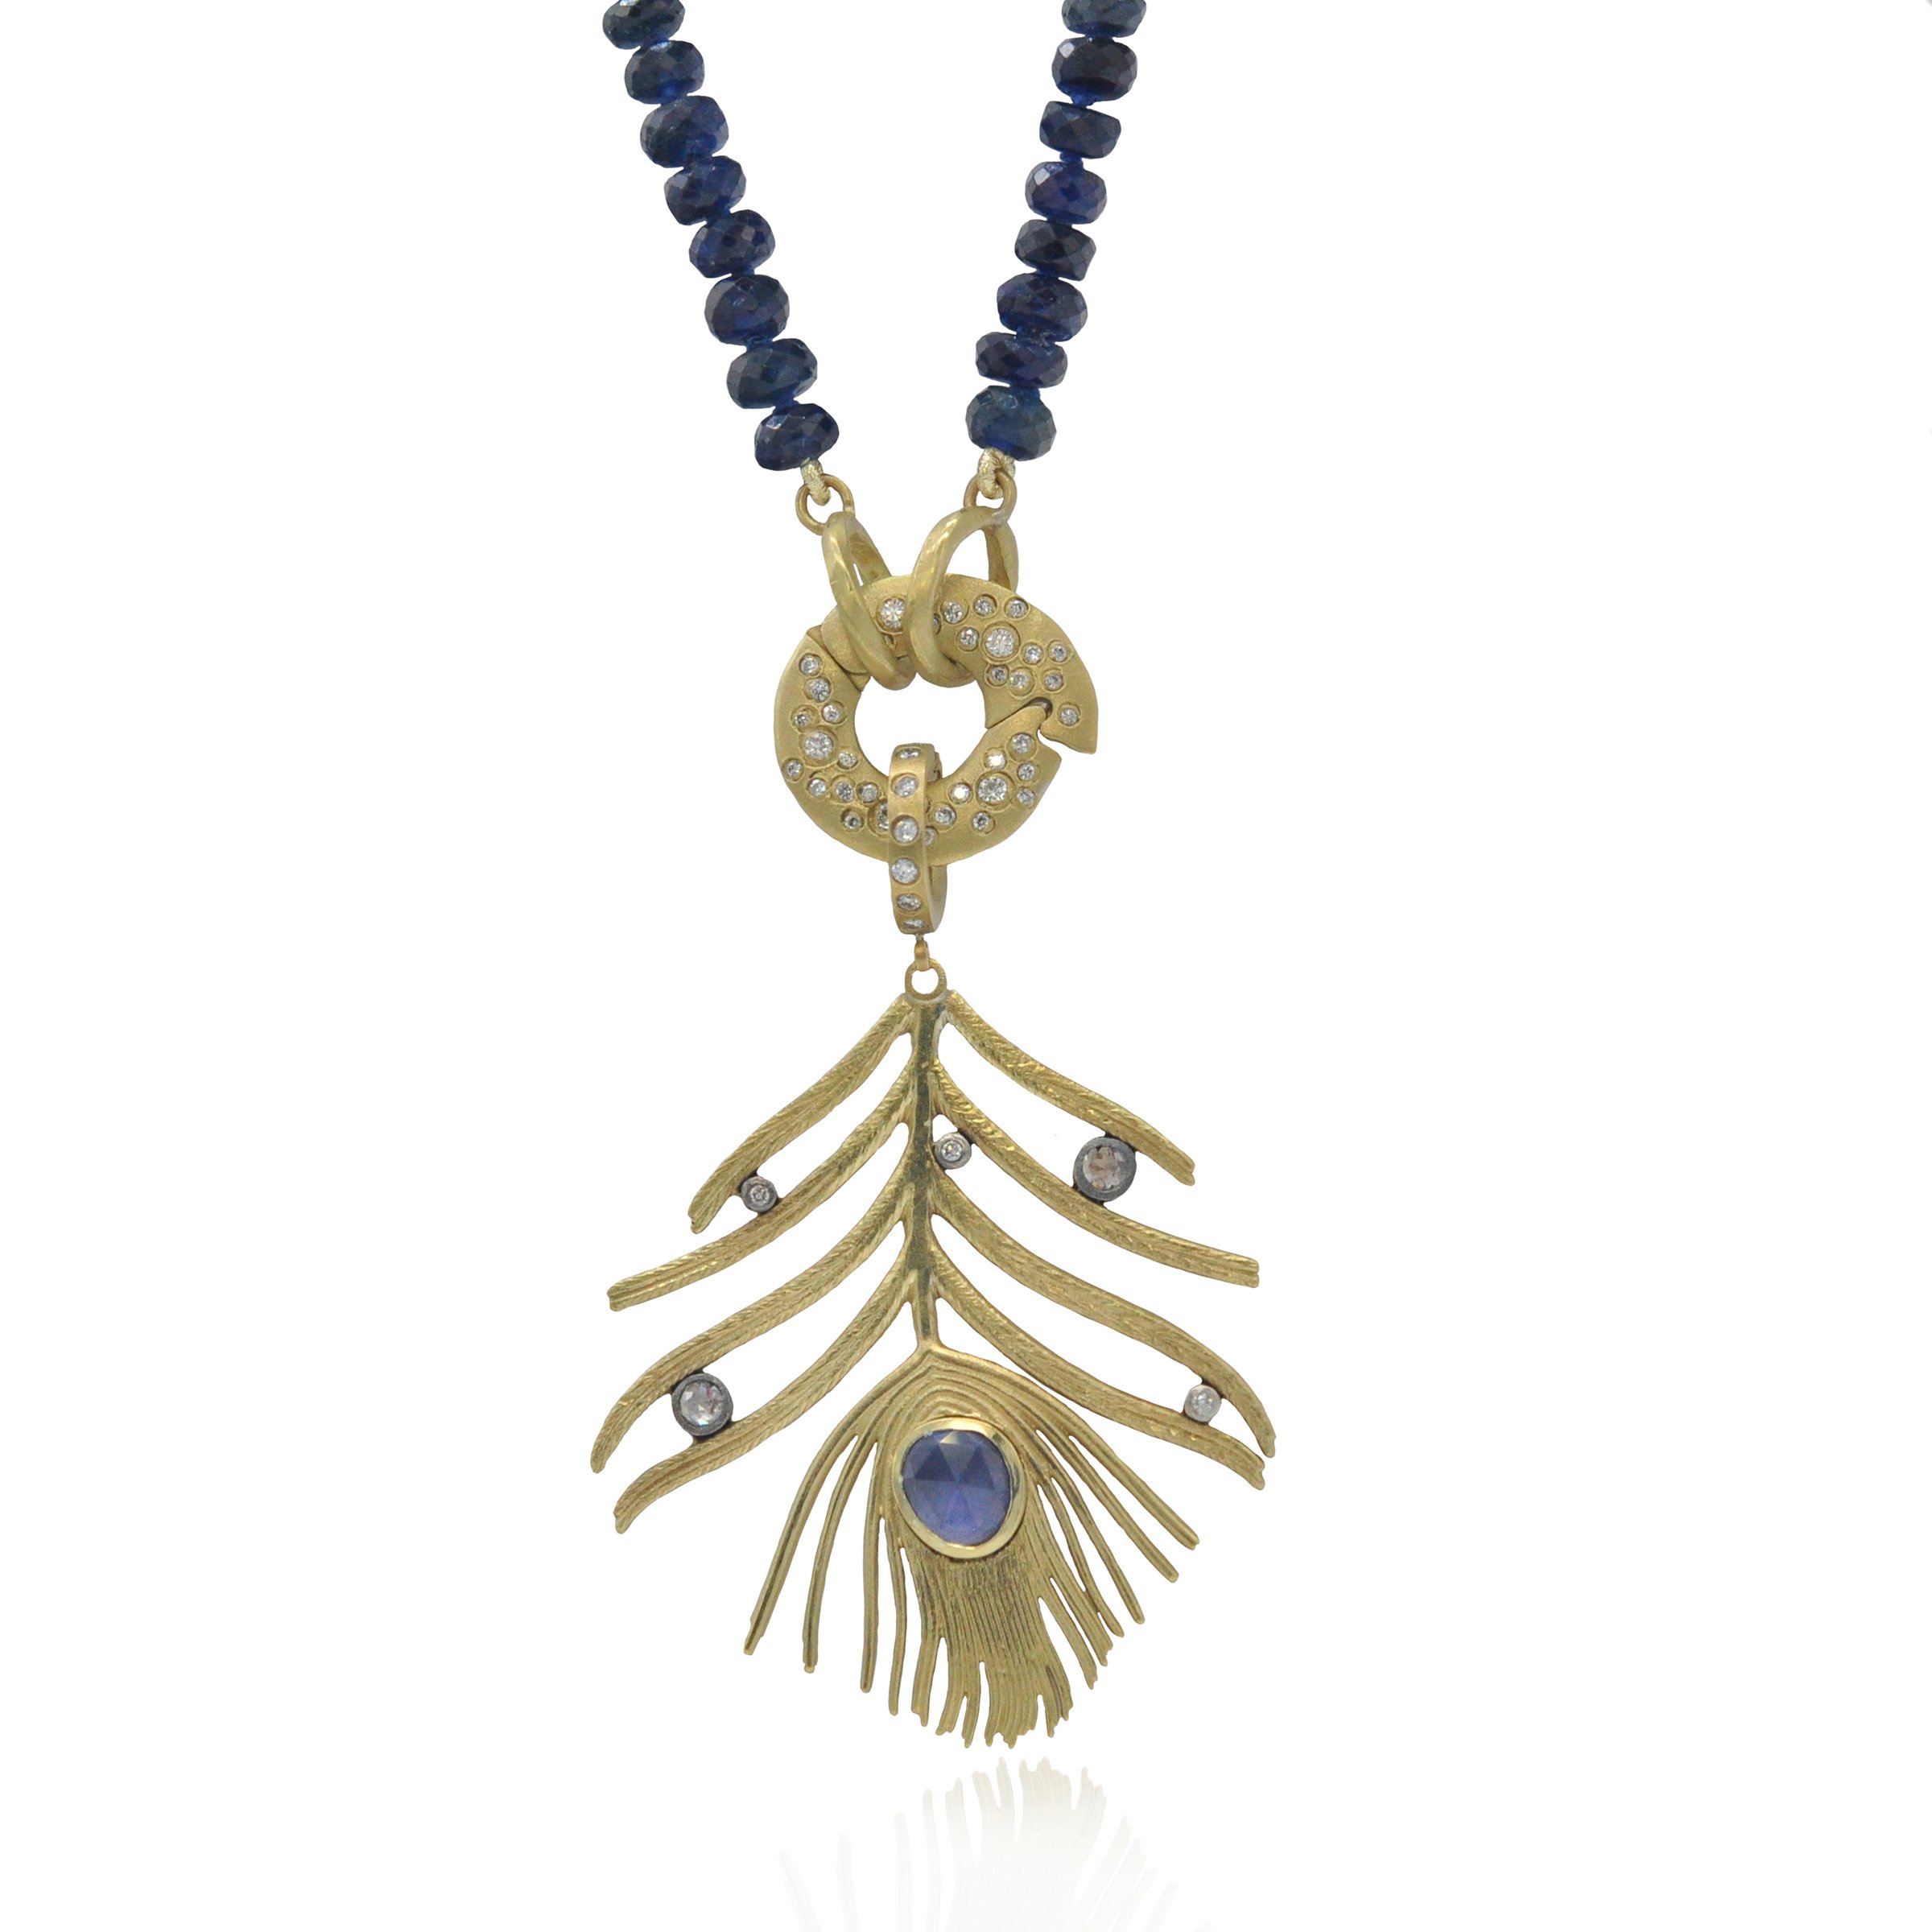 Peacock Feather Pendant on Sapphire Strand with Hinged Charm Holder.jpg